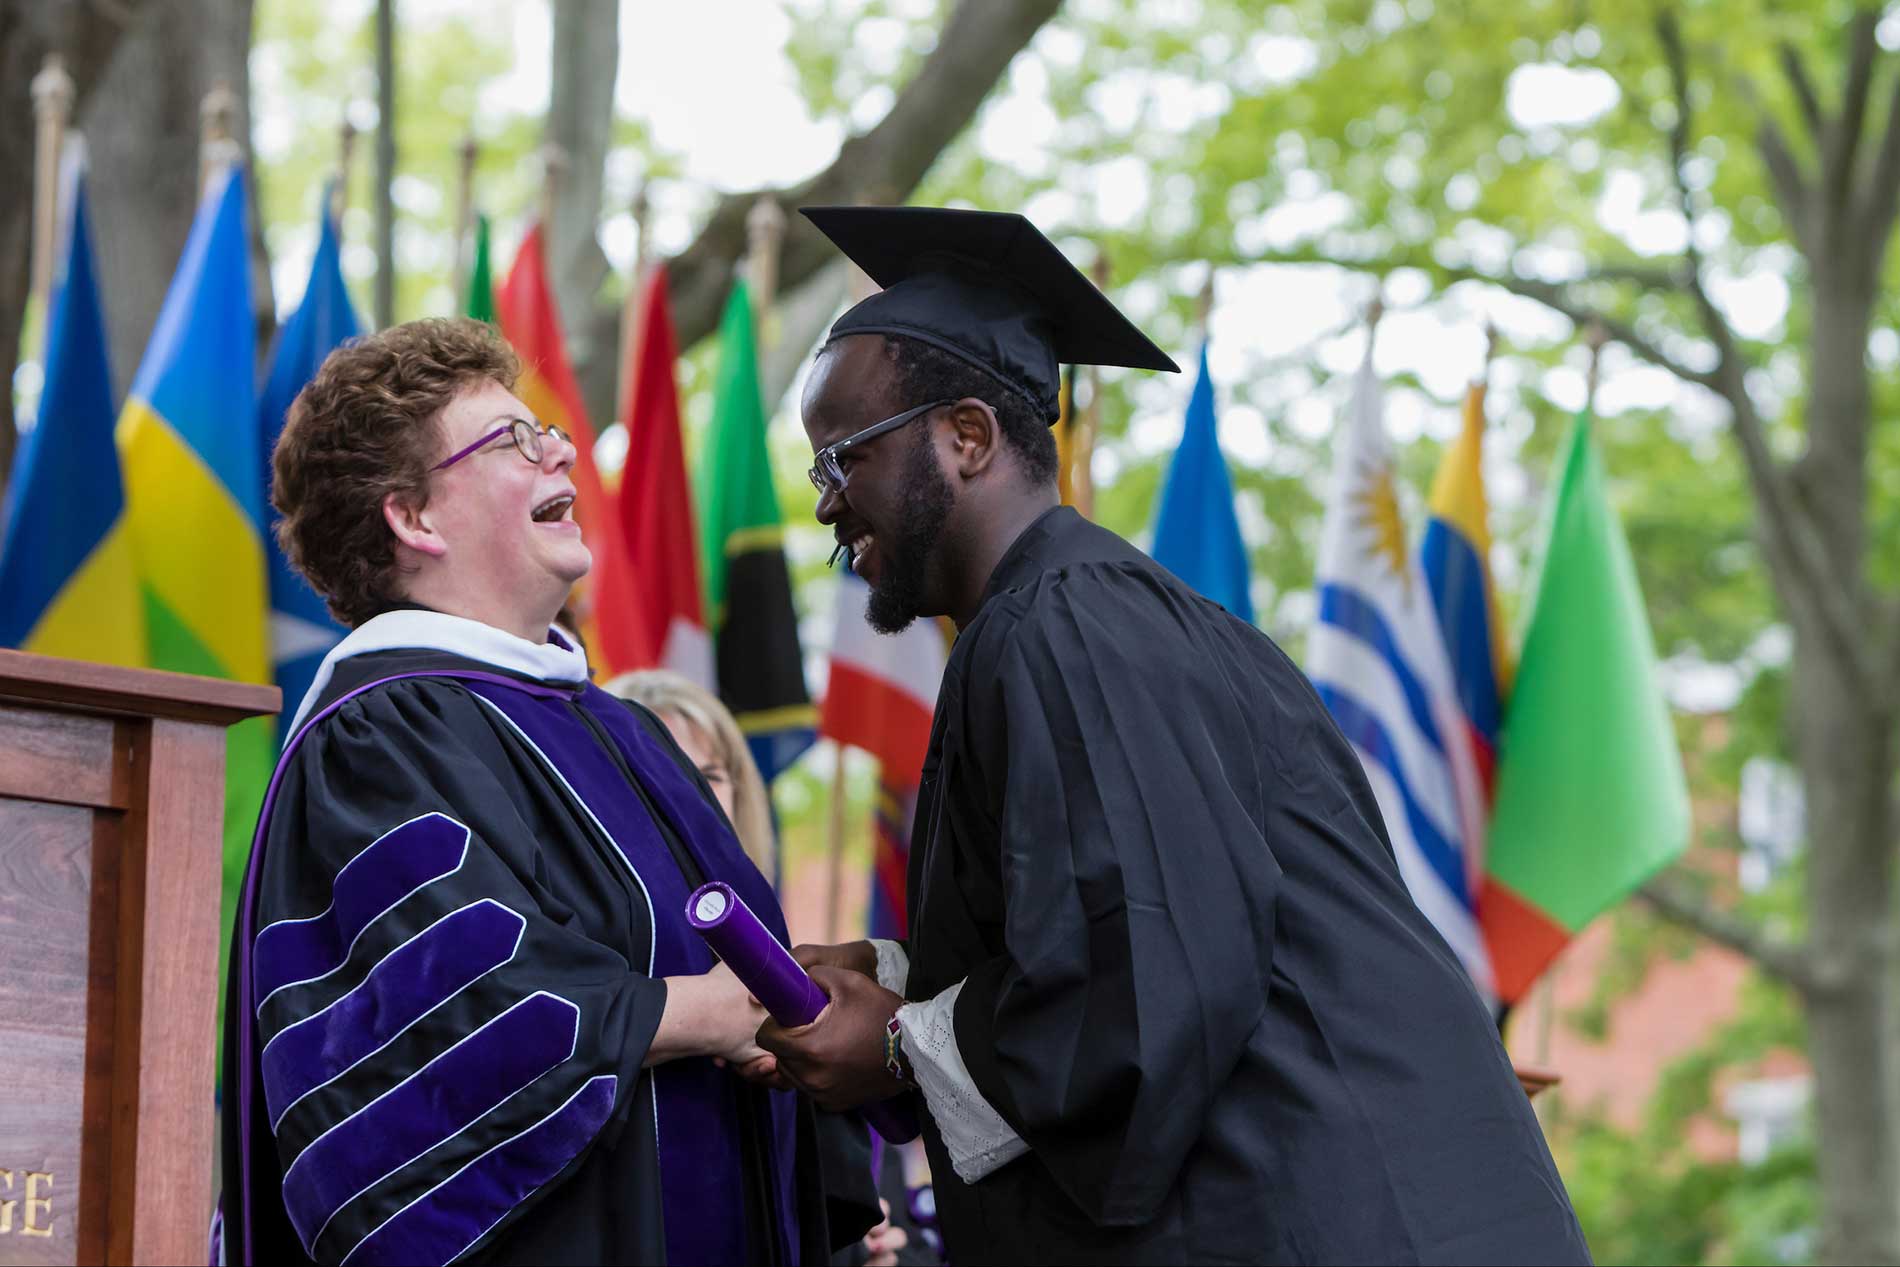 Biddy Martin shares a laugh a student as he receives his diploma during the 2016 commencement.